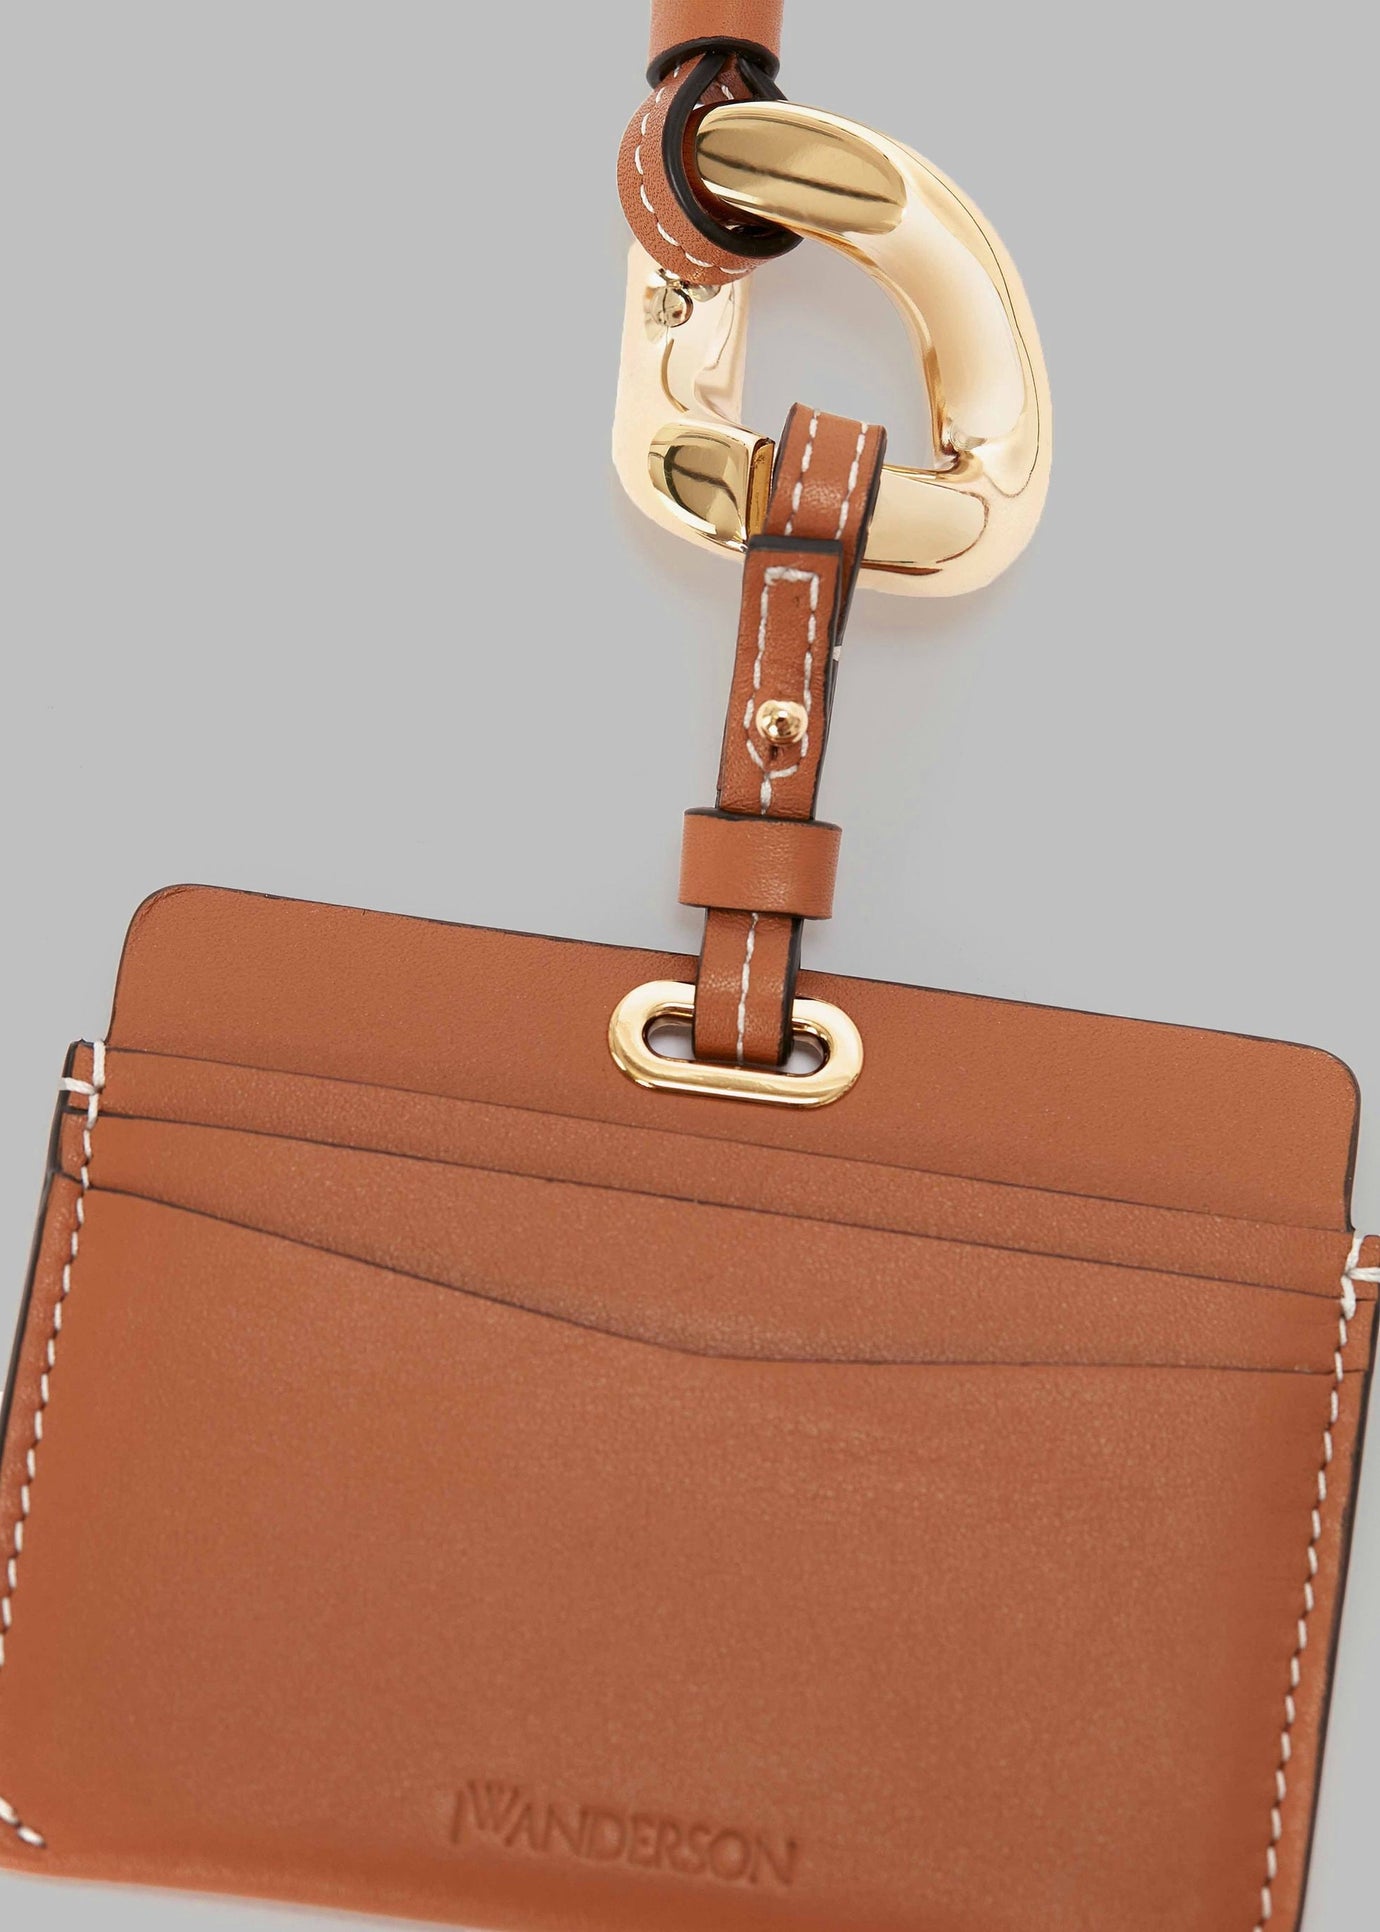 JW Anderson Cardholder with Chain Link Strap - Pecan - 1